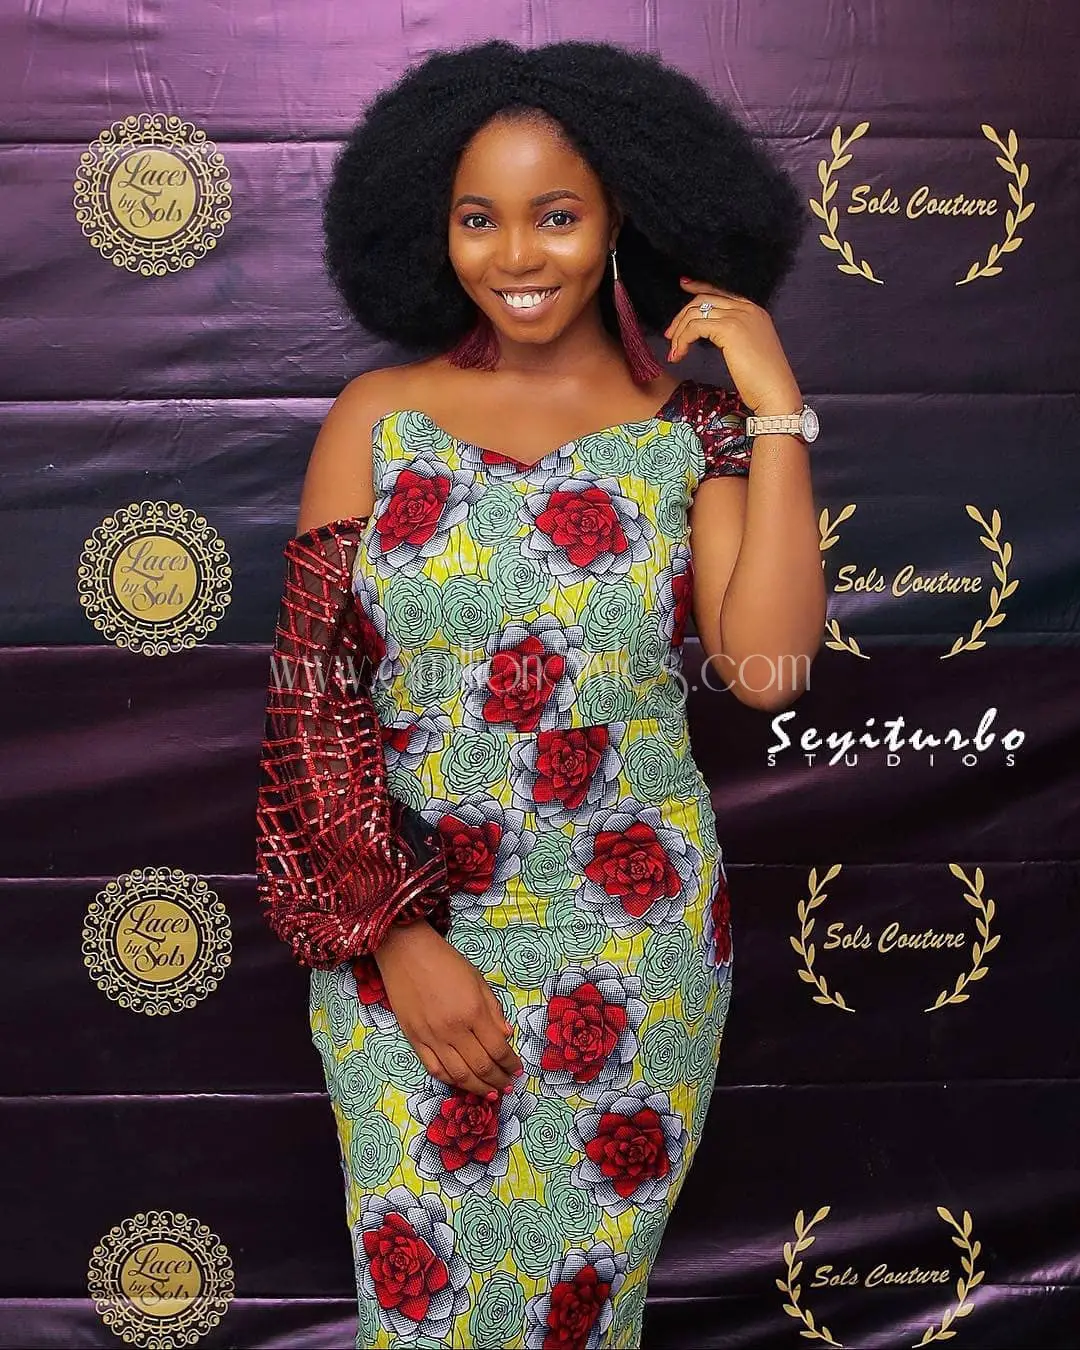 You Can't Help But Love These Fab Mix-Match Ankara Styles